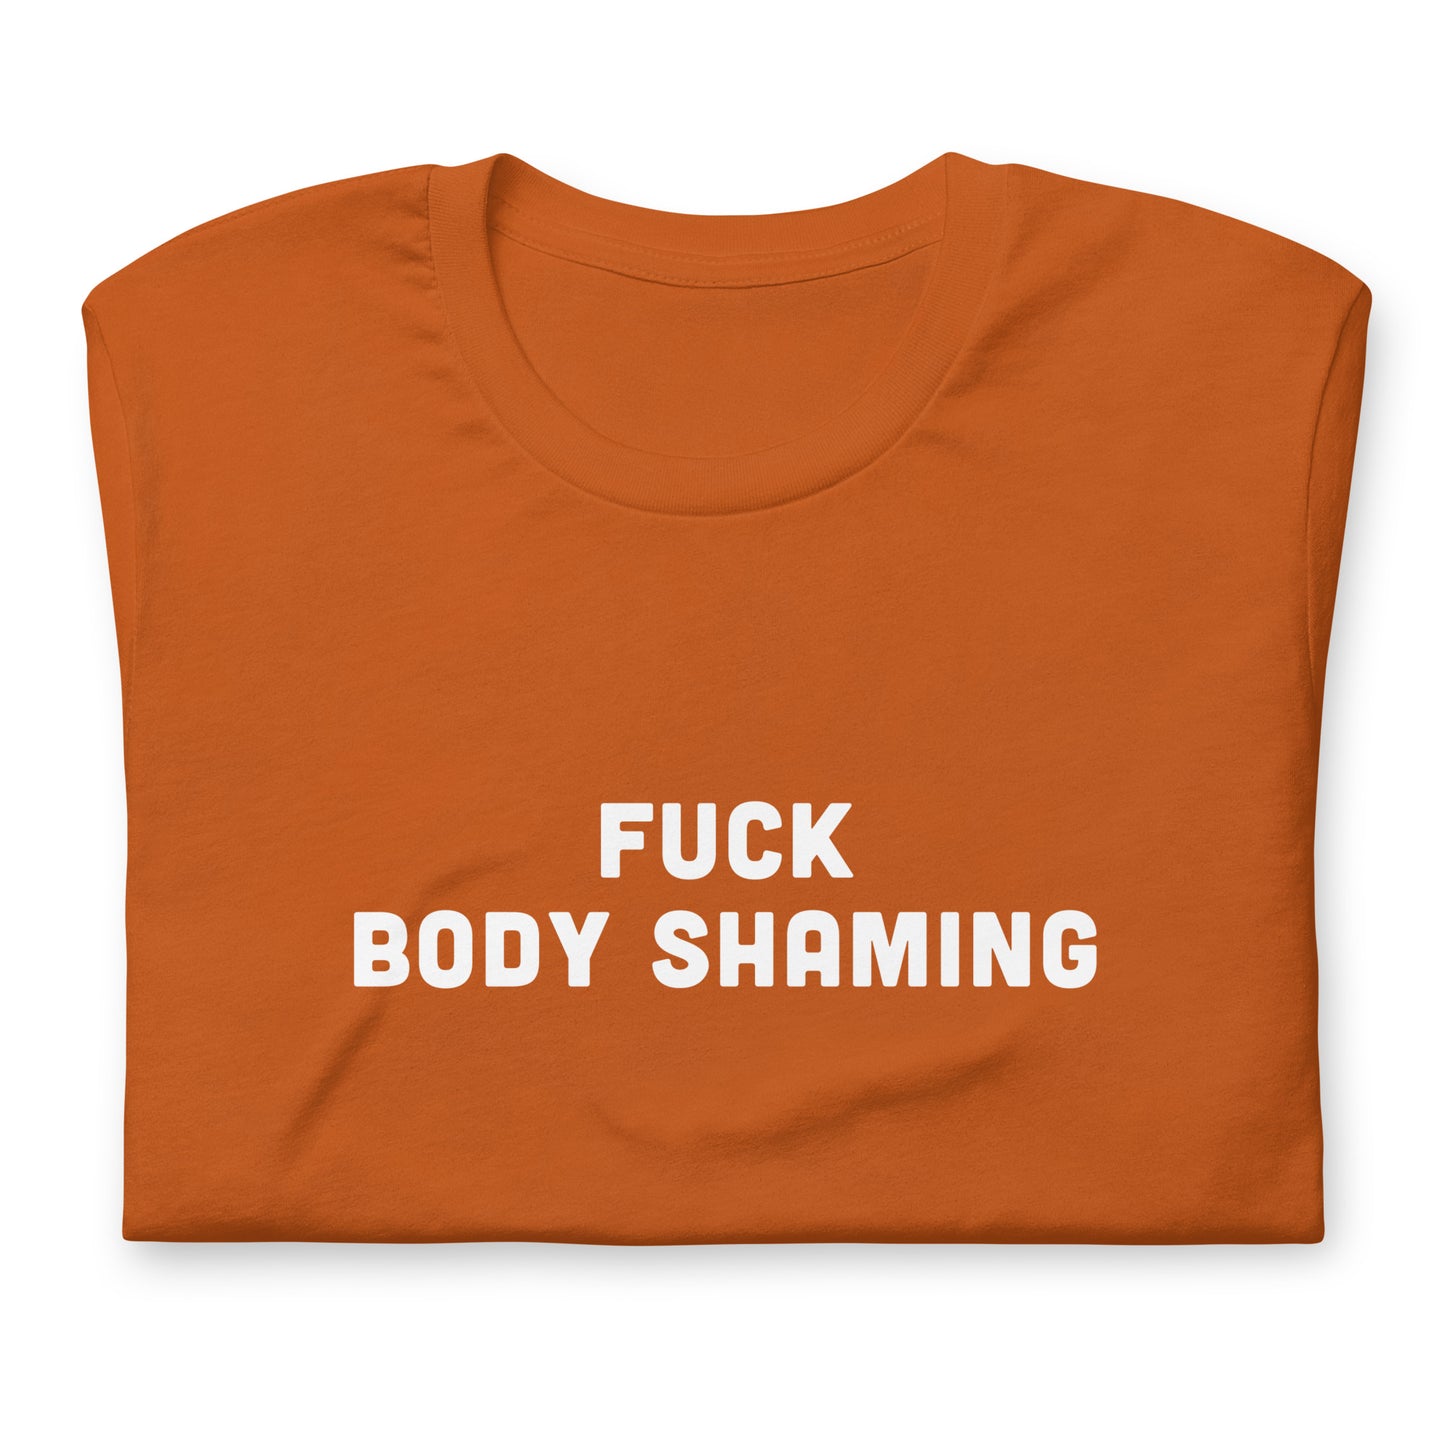 Fuck Body Shaming T-shirt Size M Color Navy